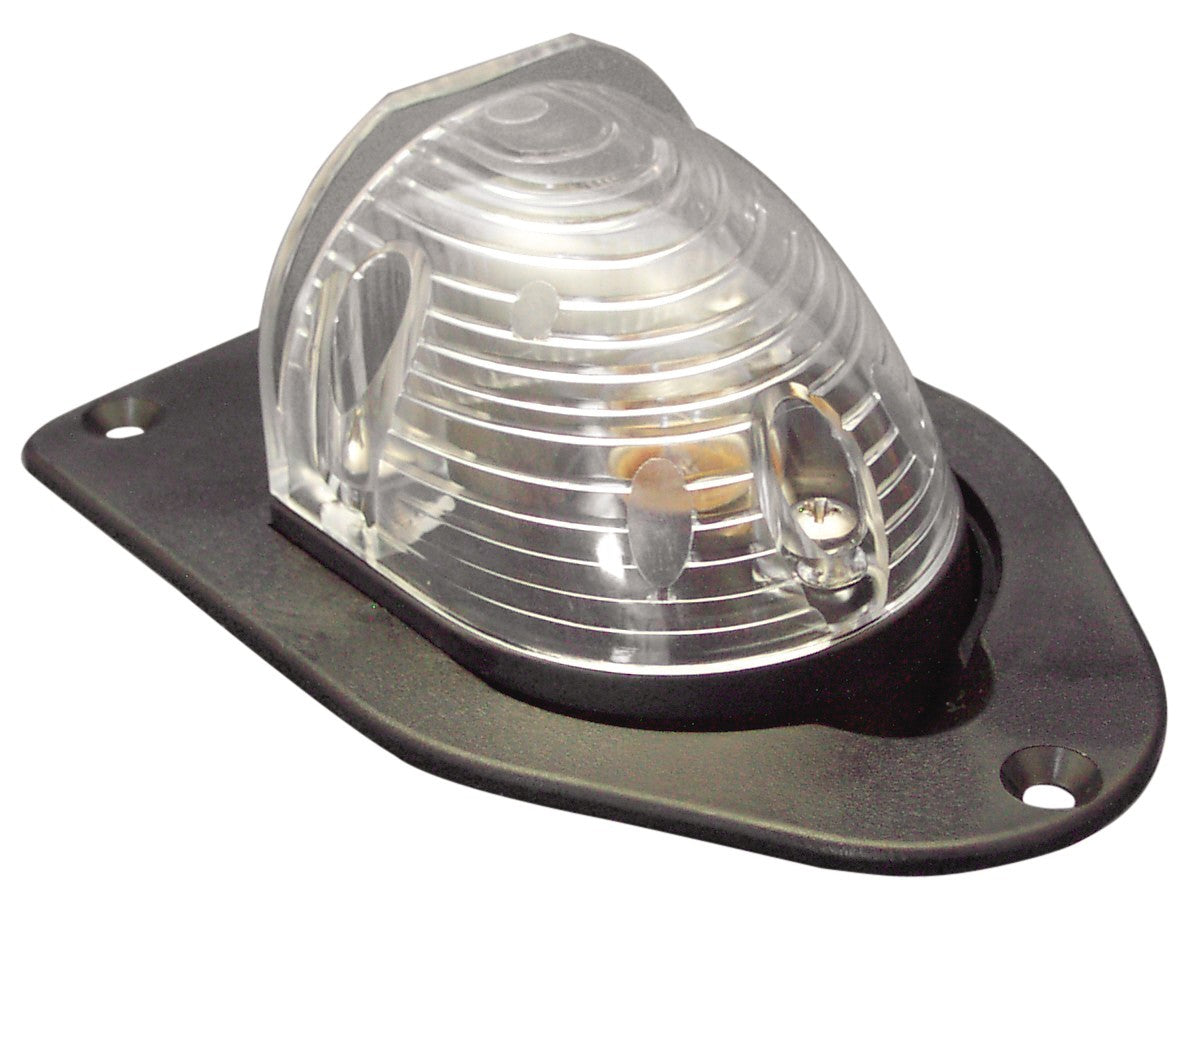 GAFFRIG PART #5911 POPUP STAINLESS STEEL STERN LIGHT LED POINTED